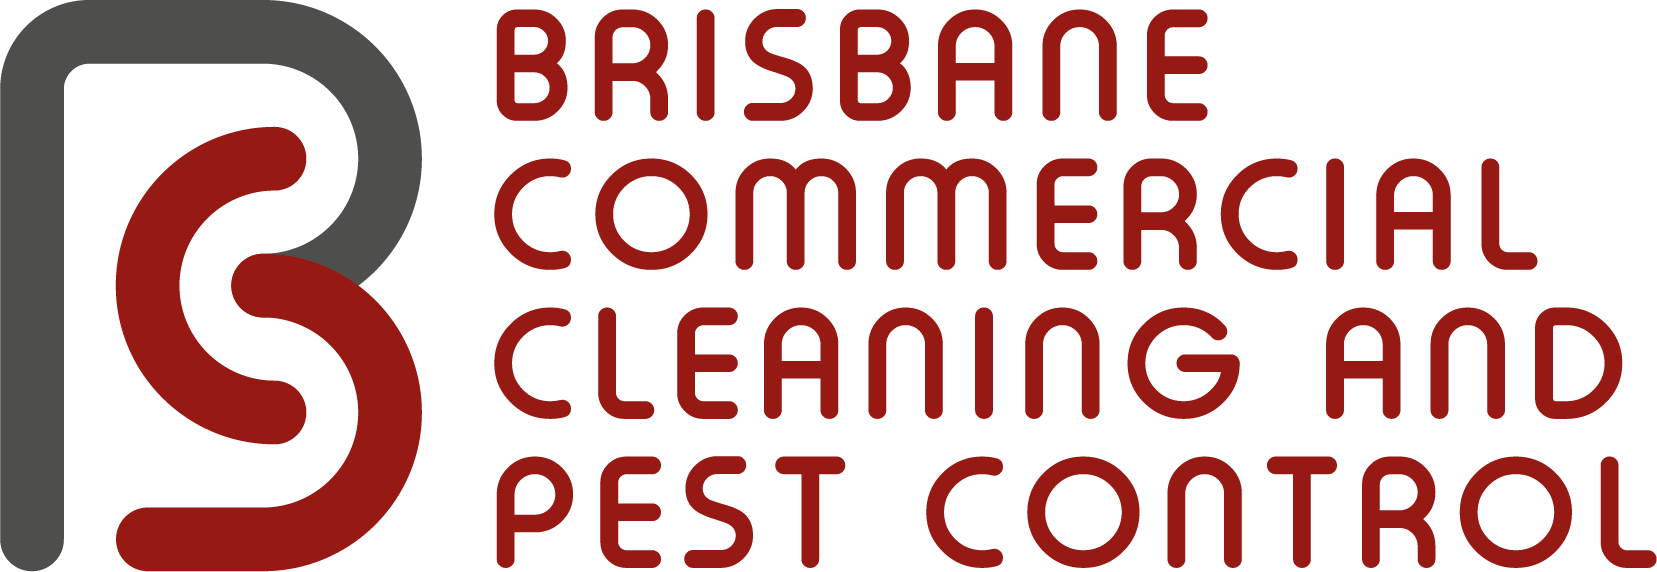 Brisbane Commercial Cleaning and Pest Control | Carpet Cleaning